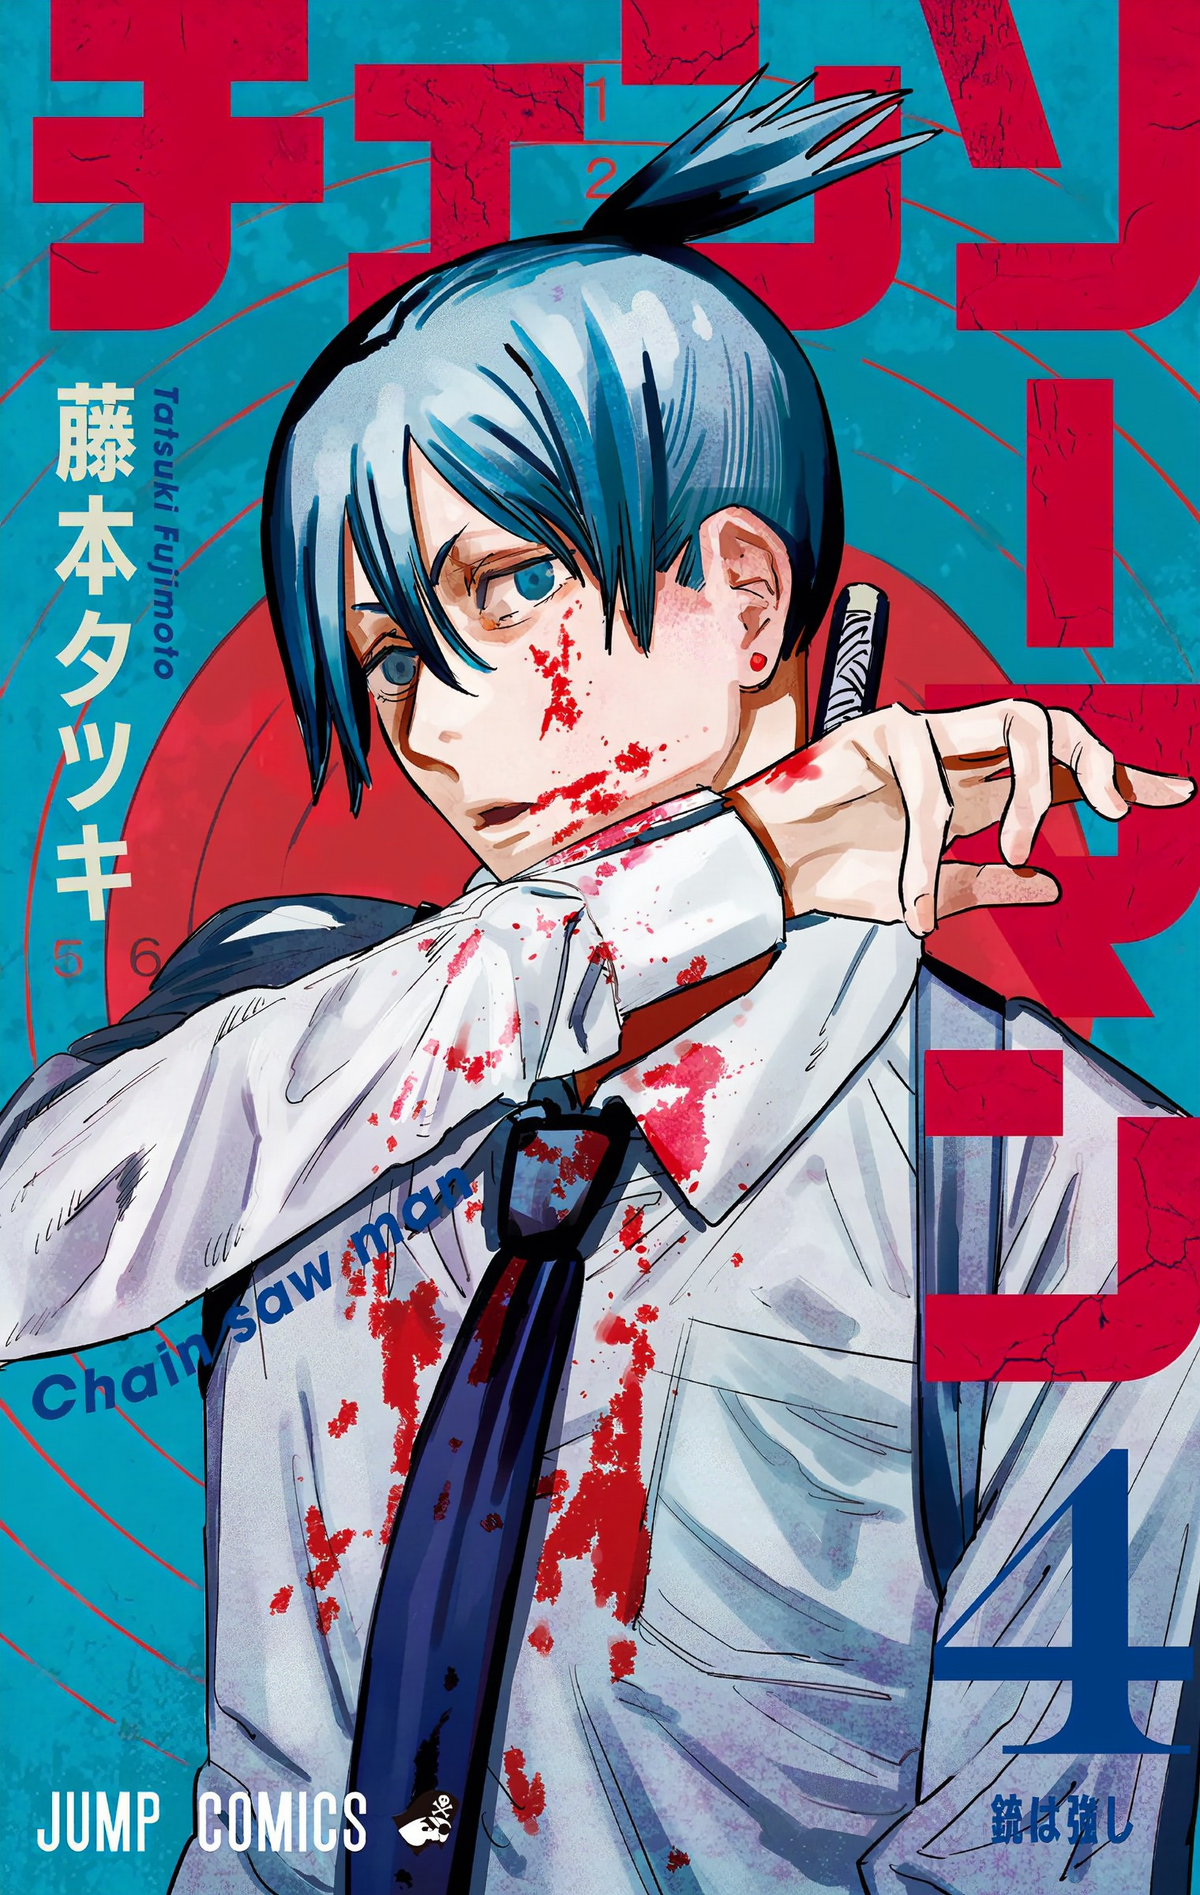 How Many Chapters Does the 'Chainsaw Man' Anime Cover?